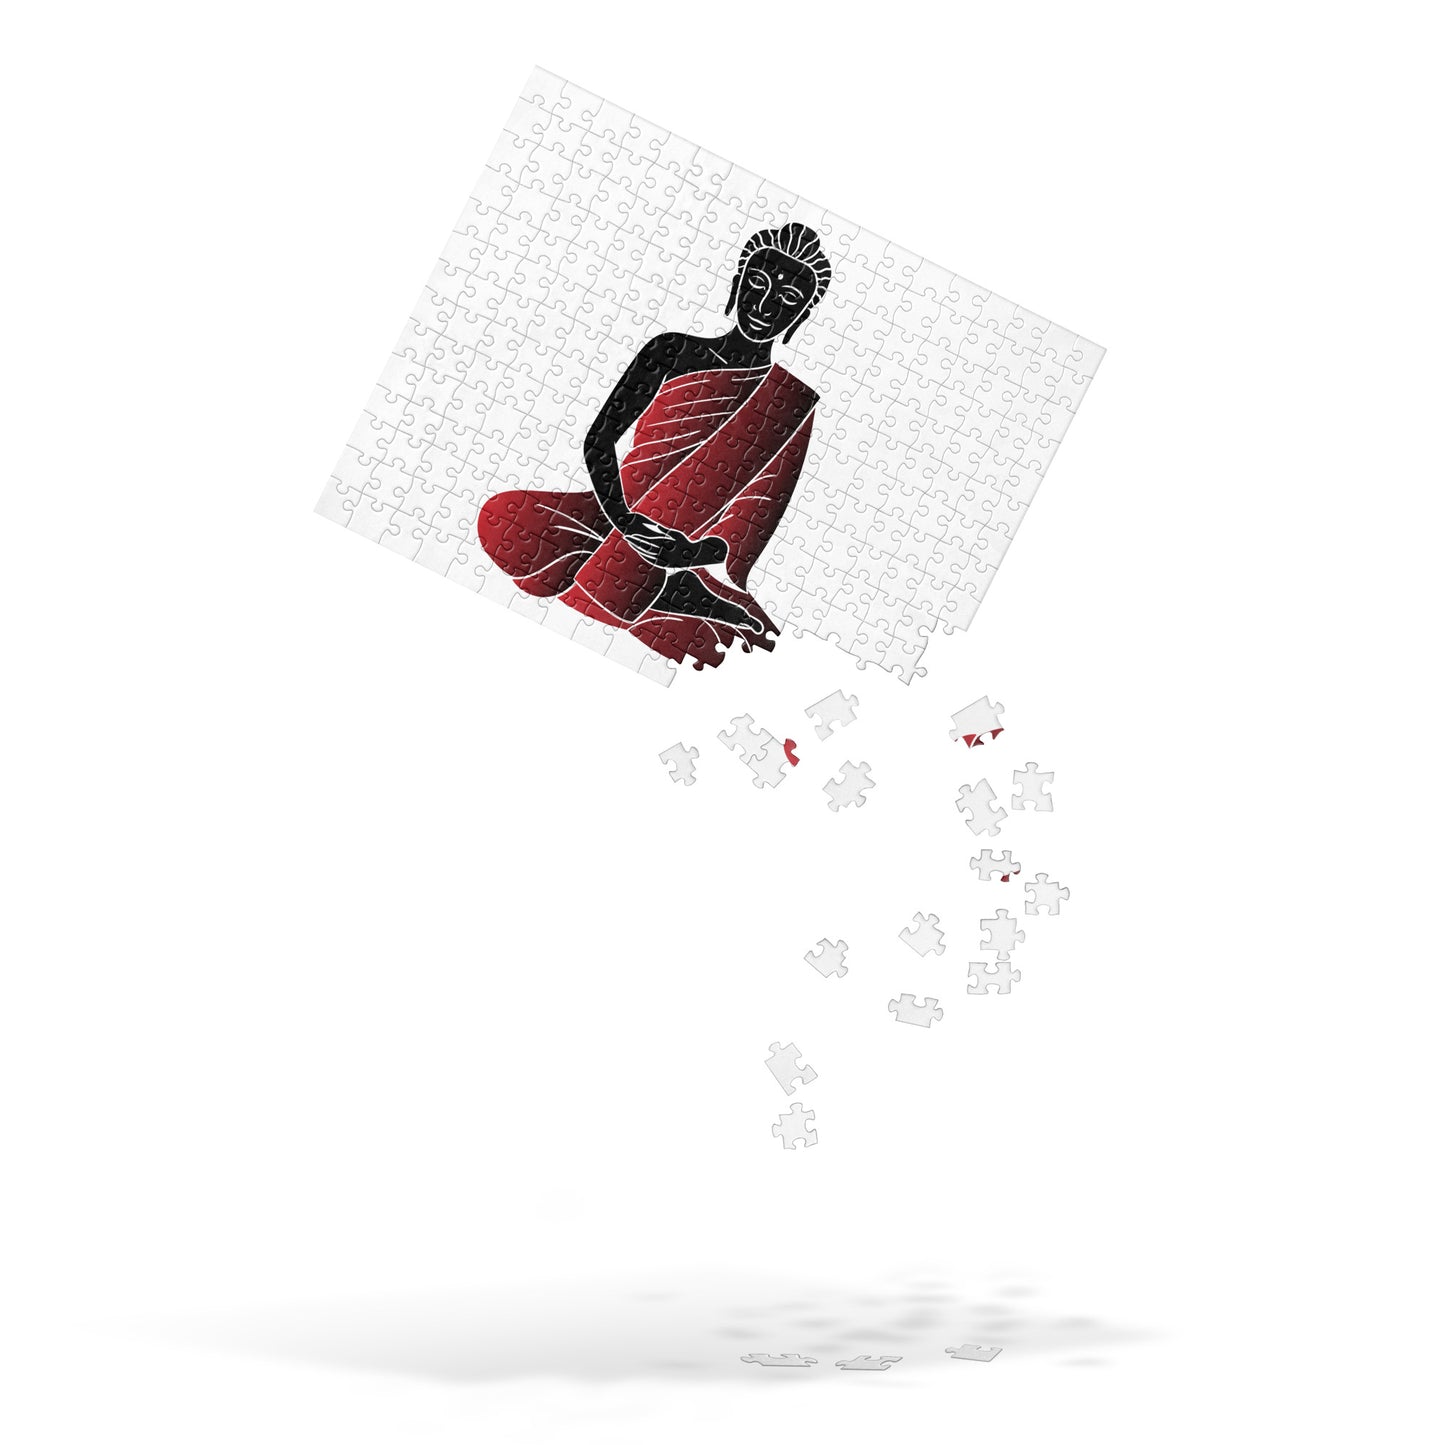 The Red Buddha Jigsaw puzzle